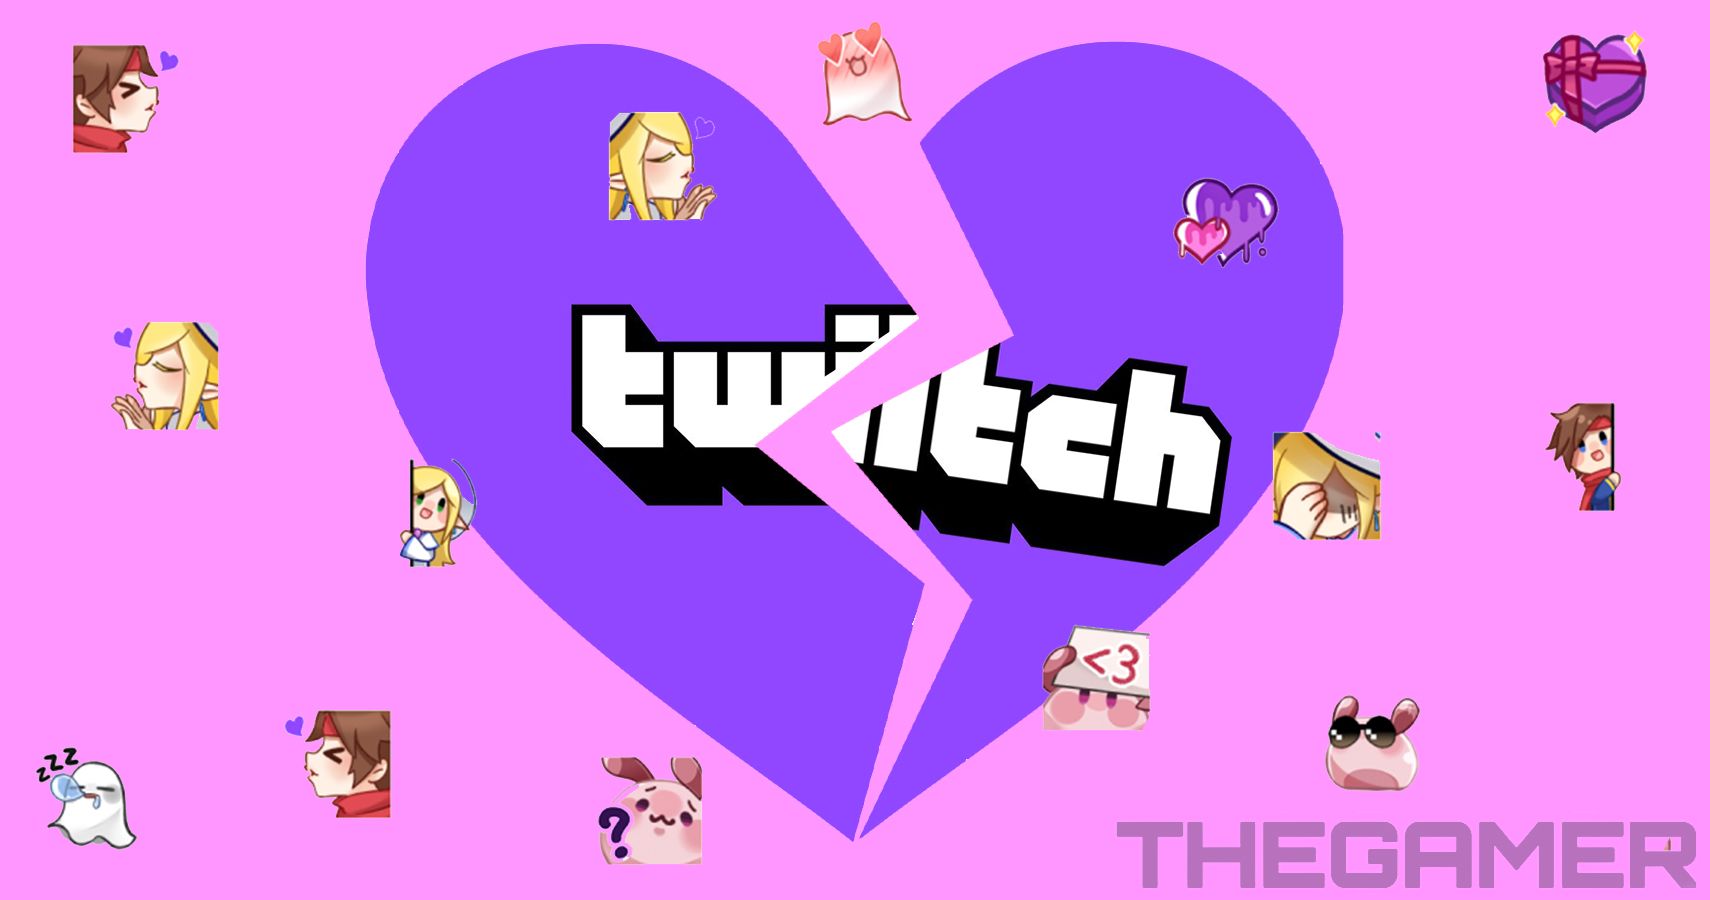 Twitch logo on a broken heart with Valentine's Deay emotes surrounding it.